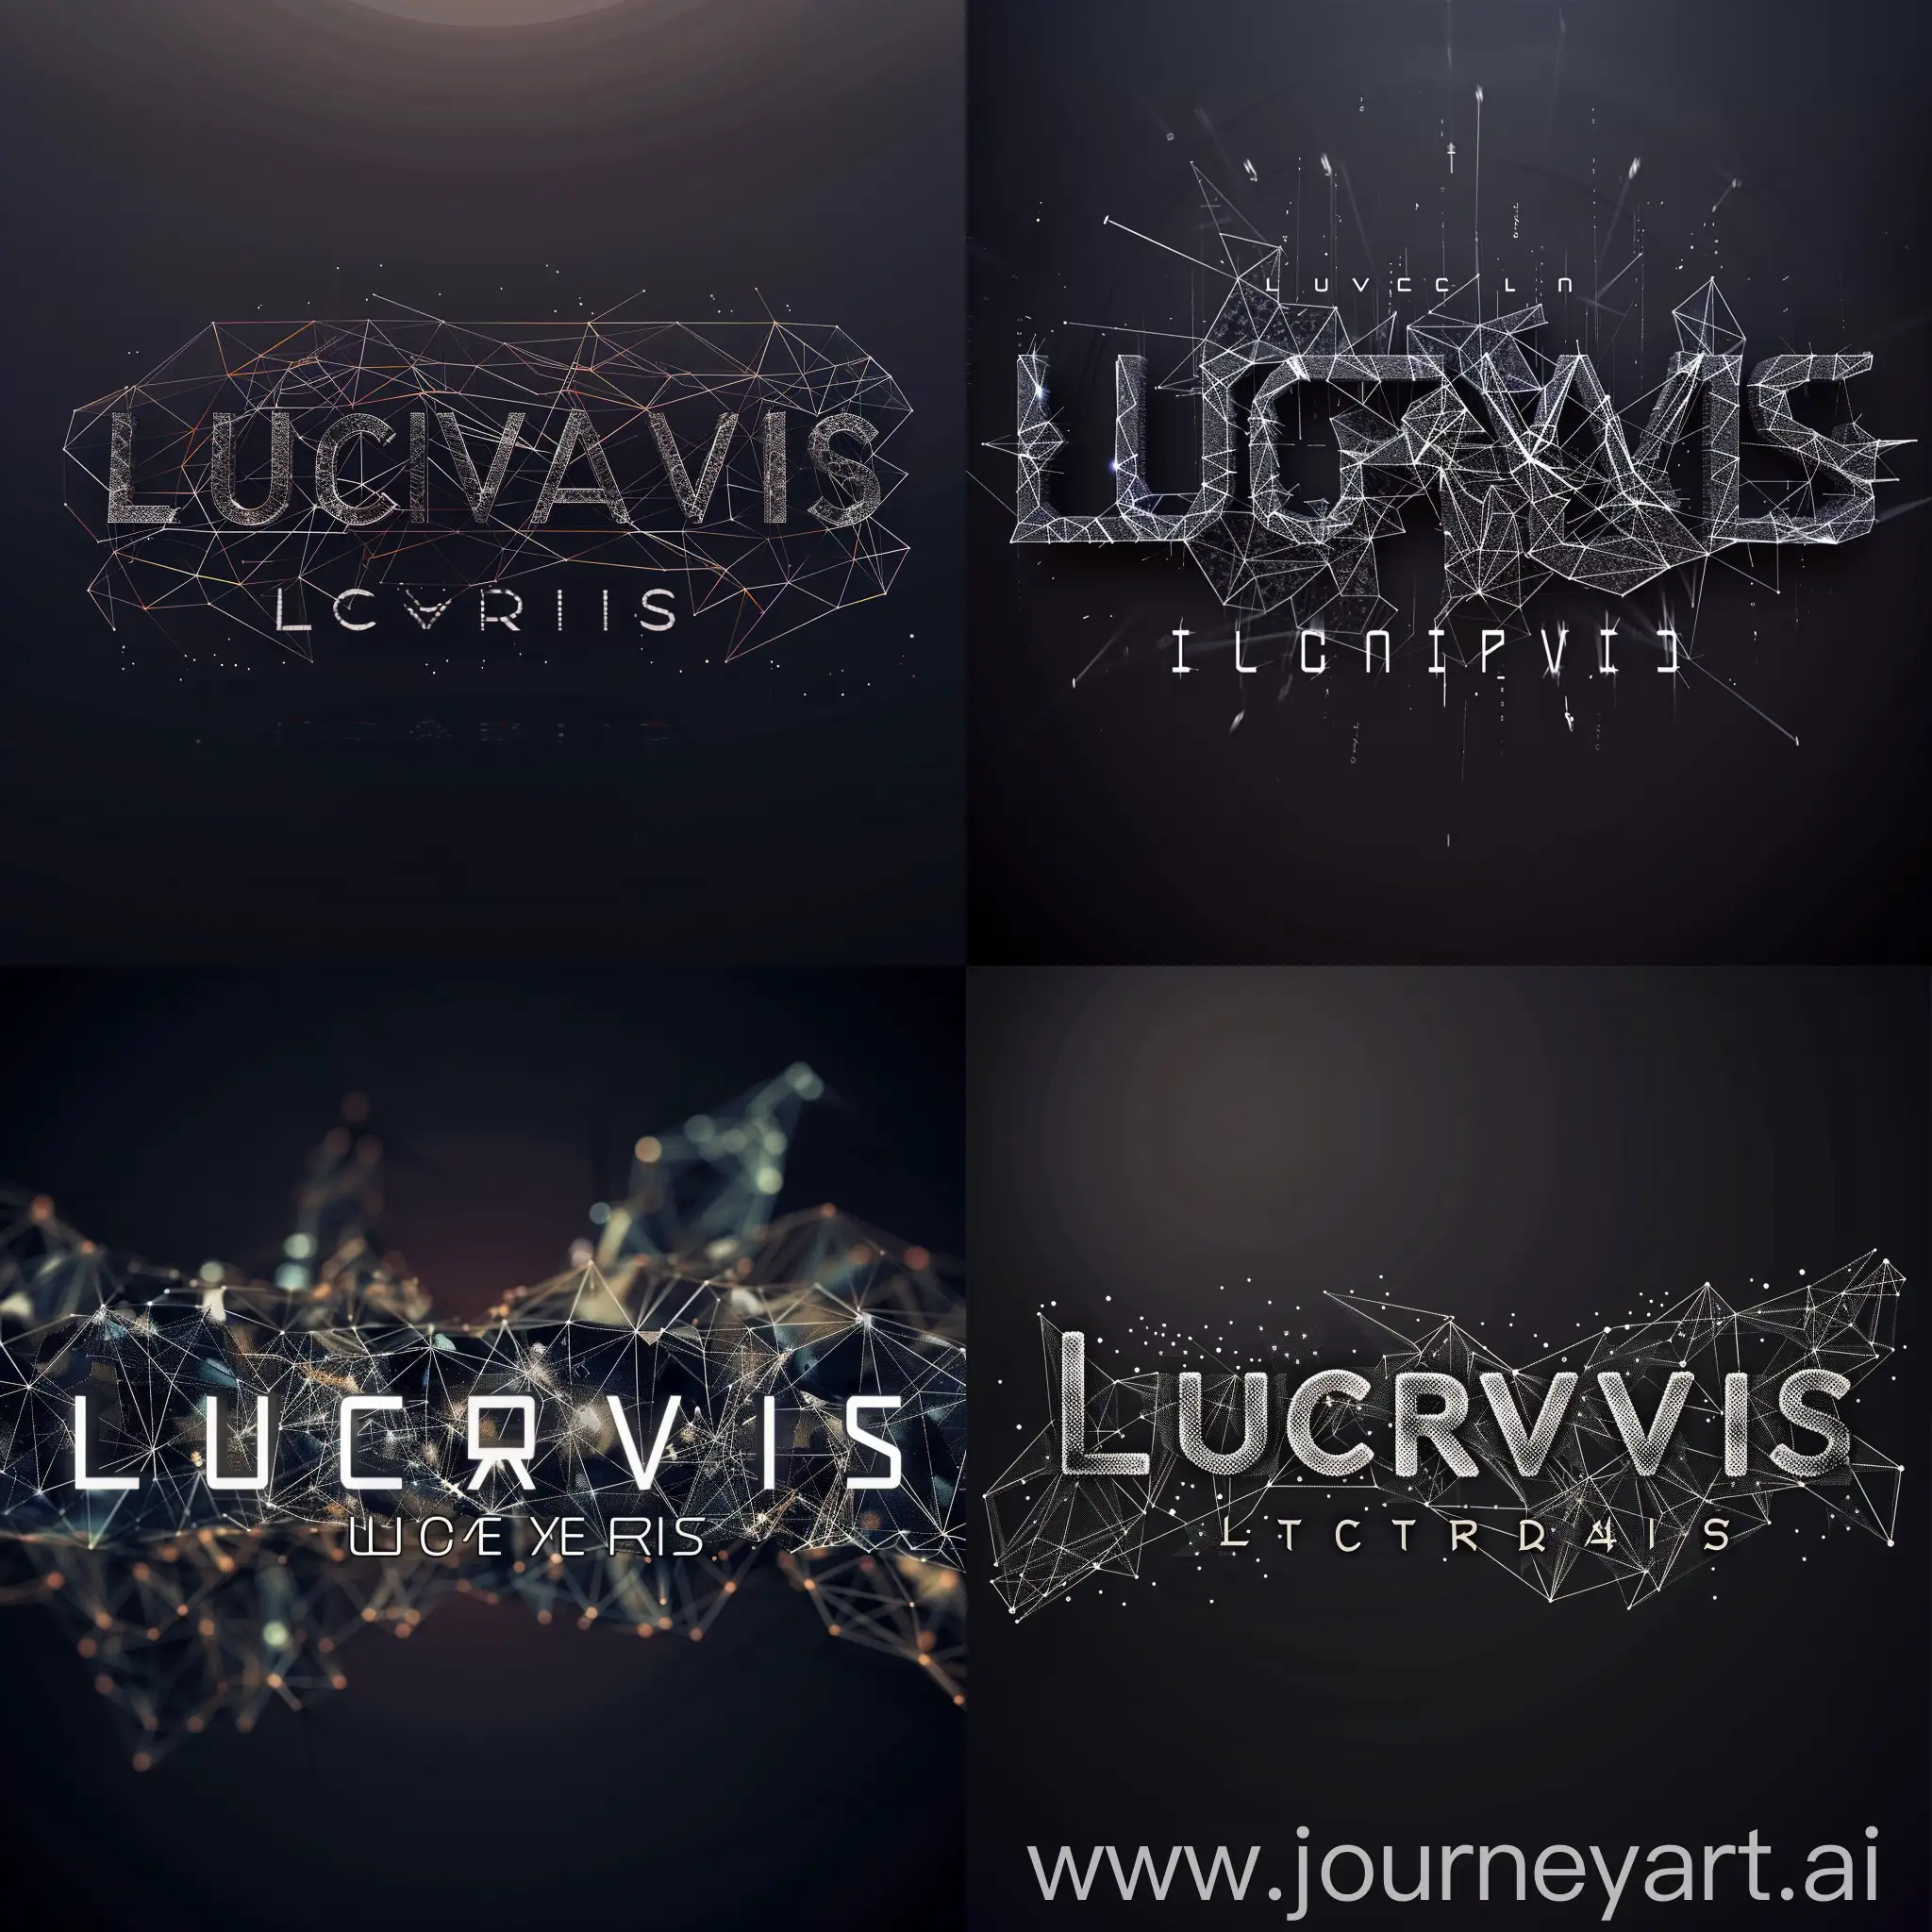 A sleek and futuristic digital font styled in a low poly art form, featuring the name "Lucravis." The letters are composed of interconnected geometric shapes and lines, creating a network-like mesh effect. The overall design gives off a high-tech, cyberpunk vibe, showcasing a modern and innovative approach to typography.